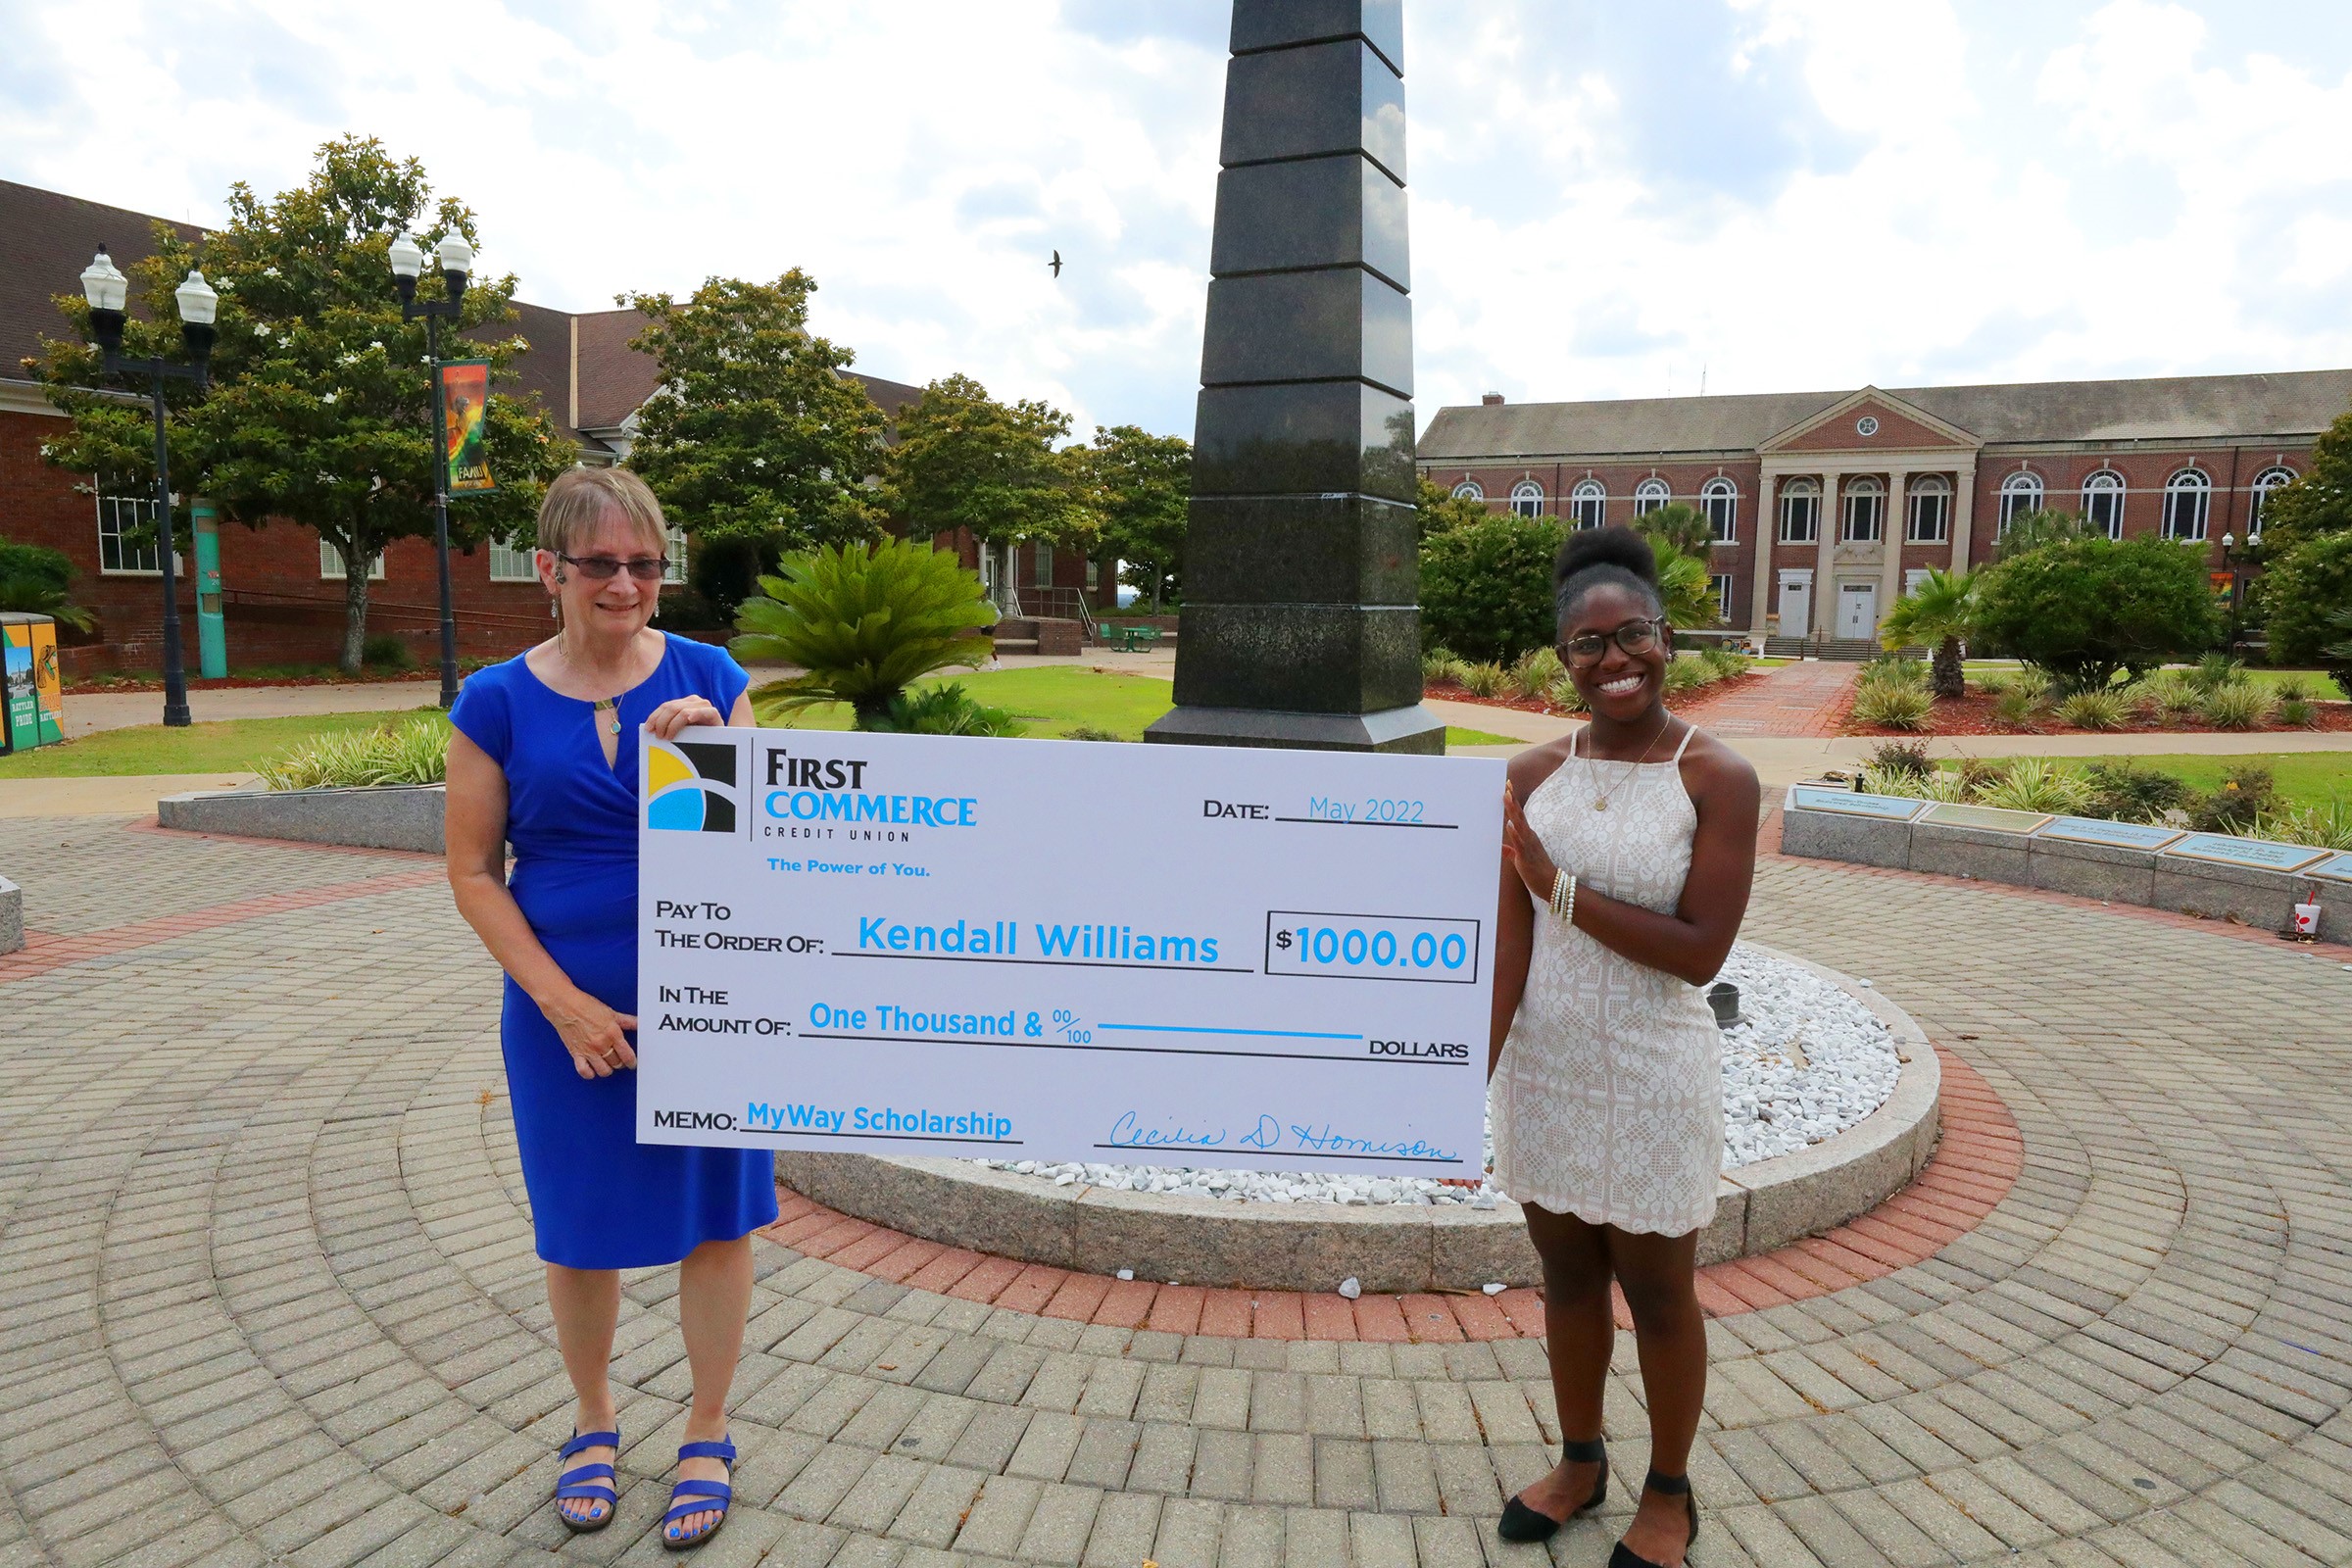 First Commerce Credit Union Awards Two $1,000 MyWay Scholarships to Local Students